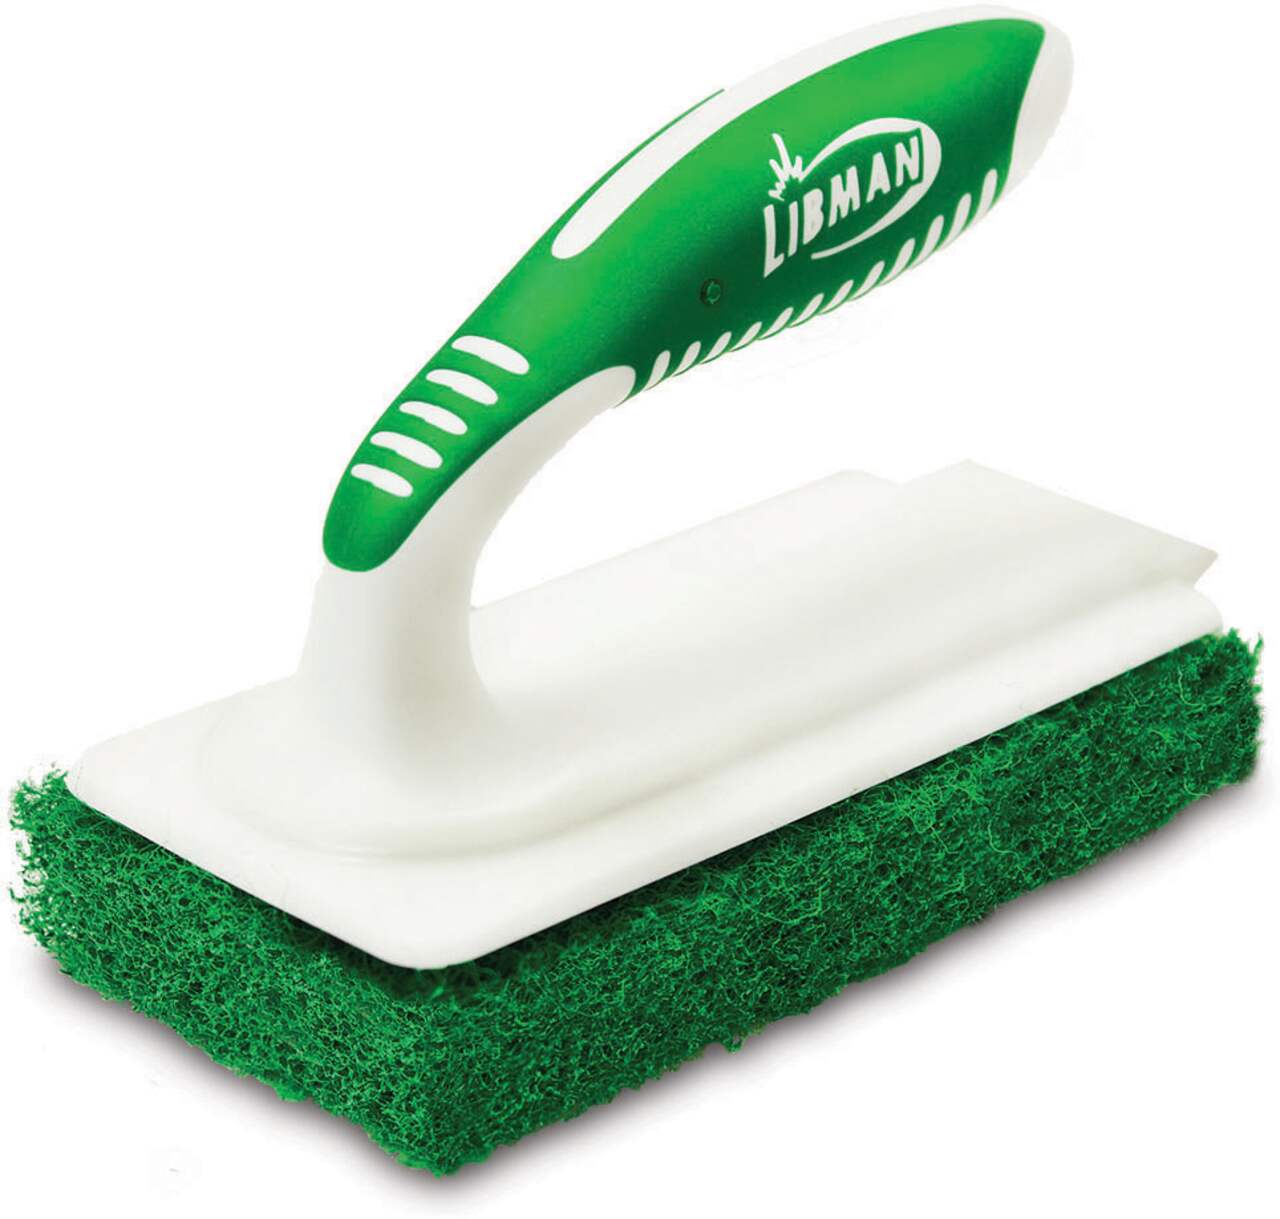 https://media-www.canadiantire.ca/product/living/cleaning/household-cleaning-tools/1425586/libman-tile-tub-scrub-brush-b80579c1-cacd-47ff-9ae4-df18d0ab775b.png?imdensity=1&imwidth=640&impolicy=mZoom